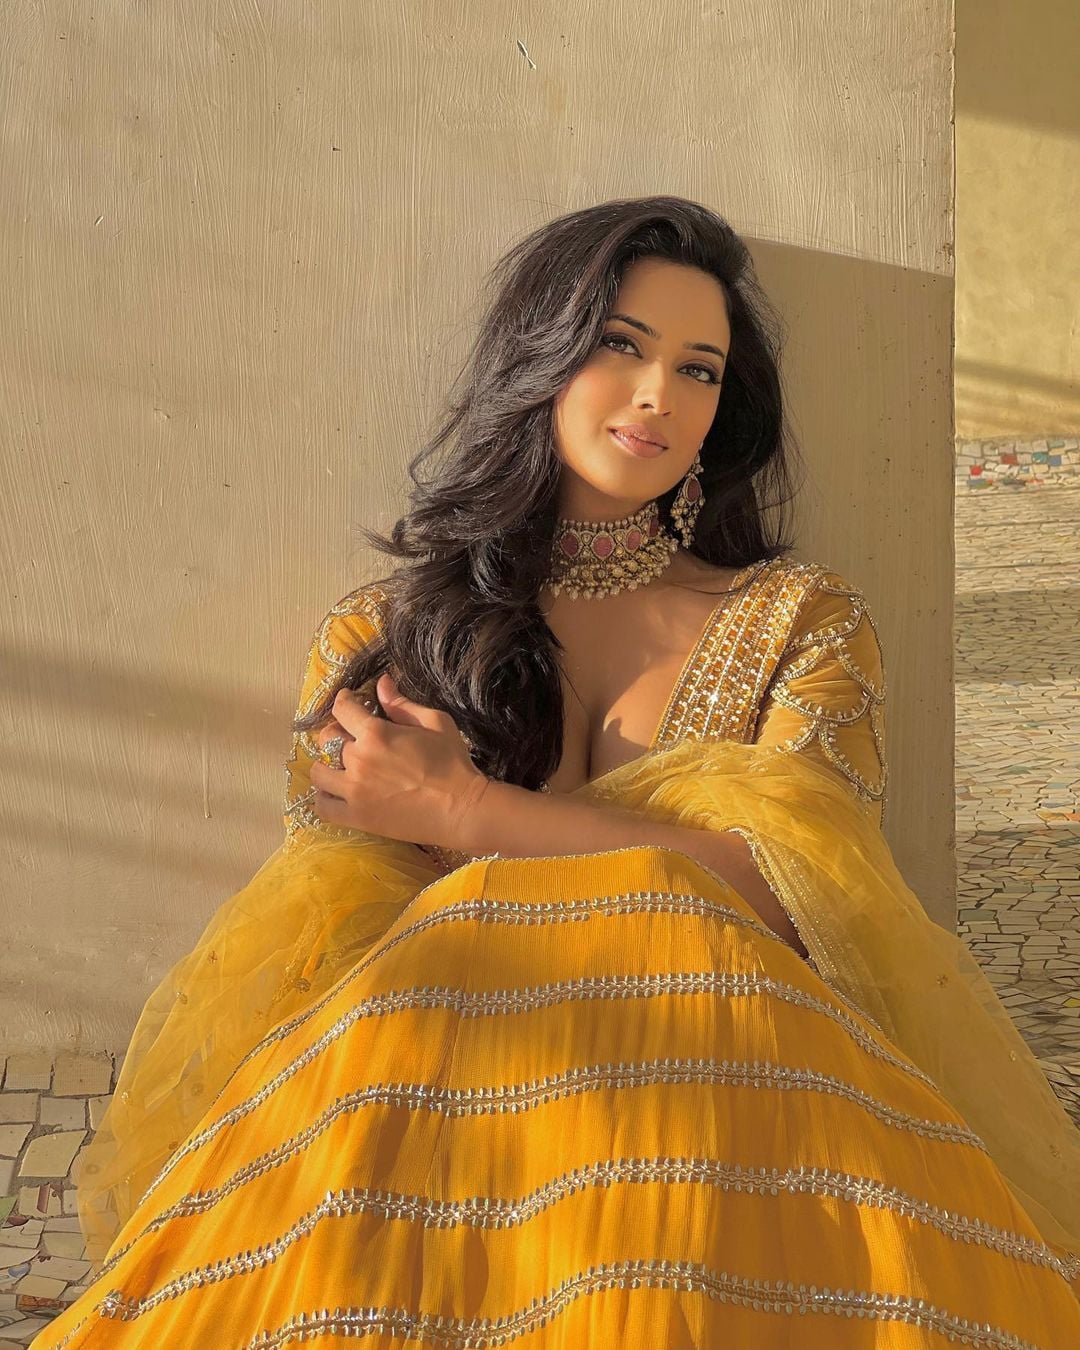 Shweta Tiwari is setting festive goals with her stunning ethnic wear looks. Scroll ahead to get a glimpse